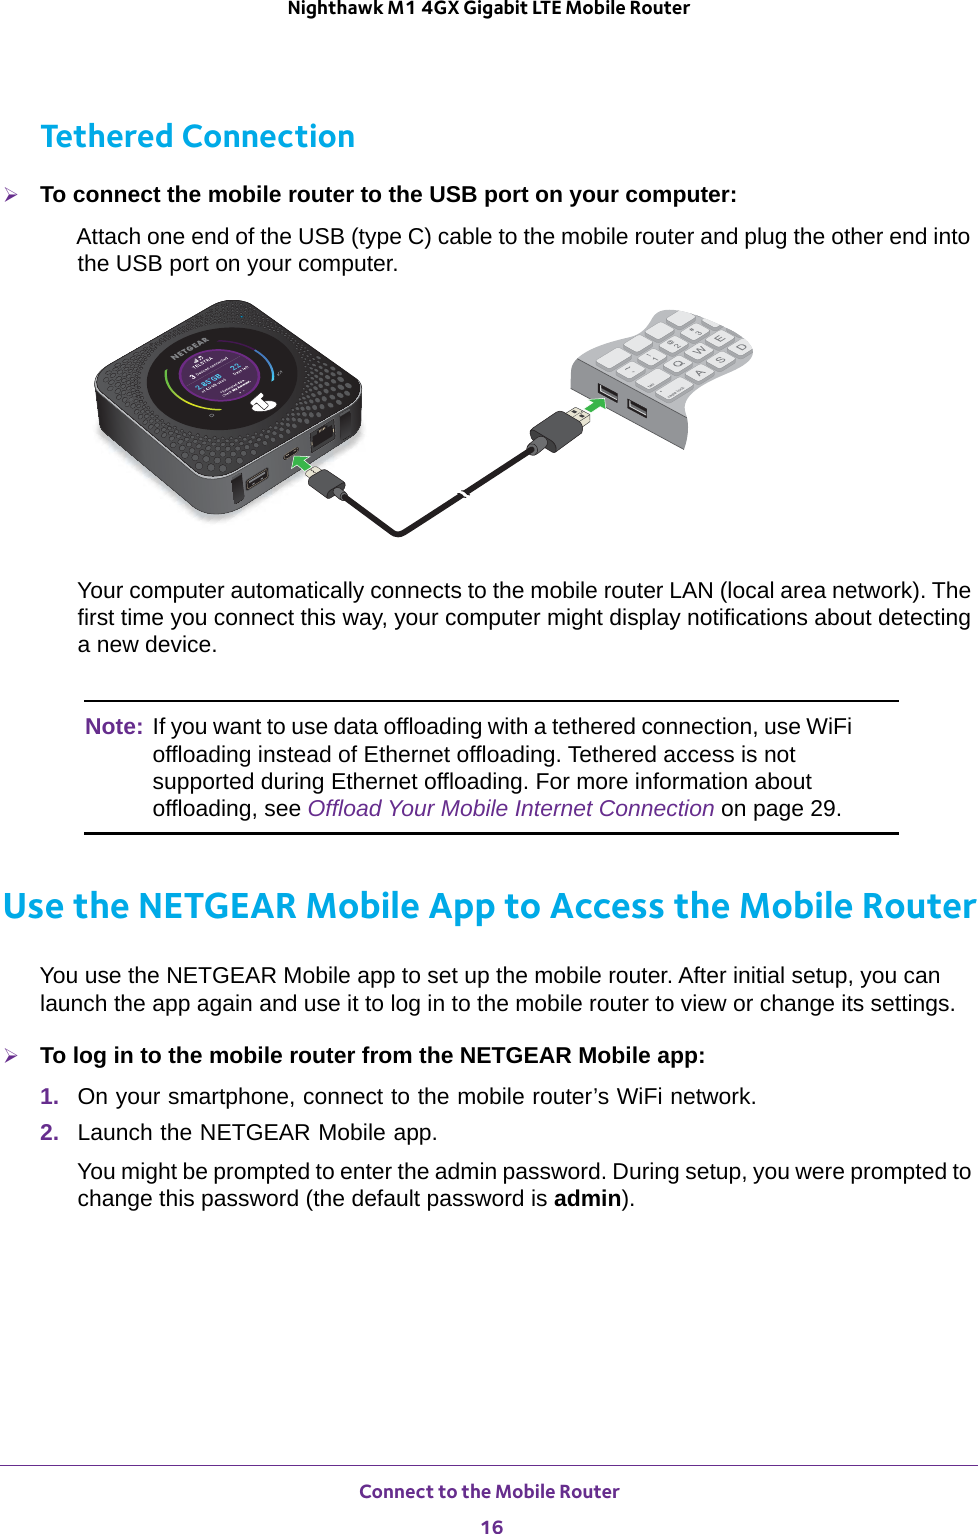 Connect to the Mobile Router 16Nighthawk M1 4GX Gigabit LTE Mobile Router Tethered ConnectionTo connect the mobile router to the USB port on your computer:Attach one end of the USB (type C) cable to the mobile router and plug the other end into the USB port on your computer. Your computer automatically connects to the mobile router LAN (local area network). The first time you connect this way, your computer might display notifications about detecting a new device.Note: If you want to use data offloading with a tethered connection, use WiFi offloading instead of Ethernet offloading. Tethered access is not supported during Ethernet offloading. For more information about offloading, see Offload Your Mobile Internet Connection on page  29.Use the NETGEAR Mobile App to Access the Mobile RouterYou use the NETGEAR Mobile app to set up the mobile router. After initial setup, you can launch the app again and use it to log in to the mobile router to view or change its settings.To log in to the mobile router from the NETGEAR Mobile app:1.  On your smartphone, connect to the mobile router’s WiFi network.2.  Launch the NETGEAR Mobile app.You might be prompted to enter the admin password. During setup, you were prompted to change this password (the default password is admin).